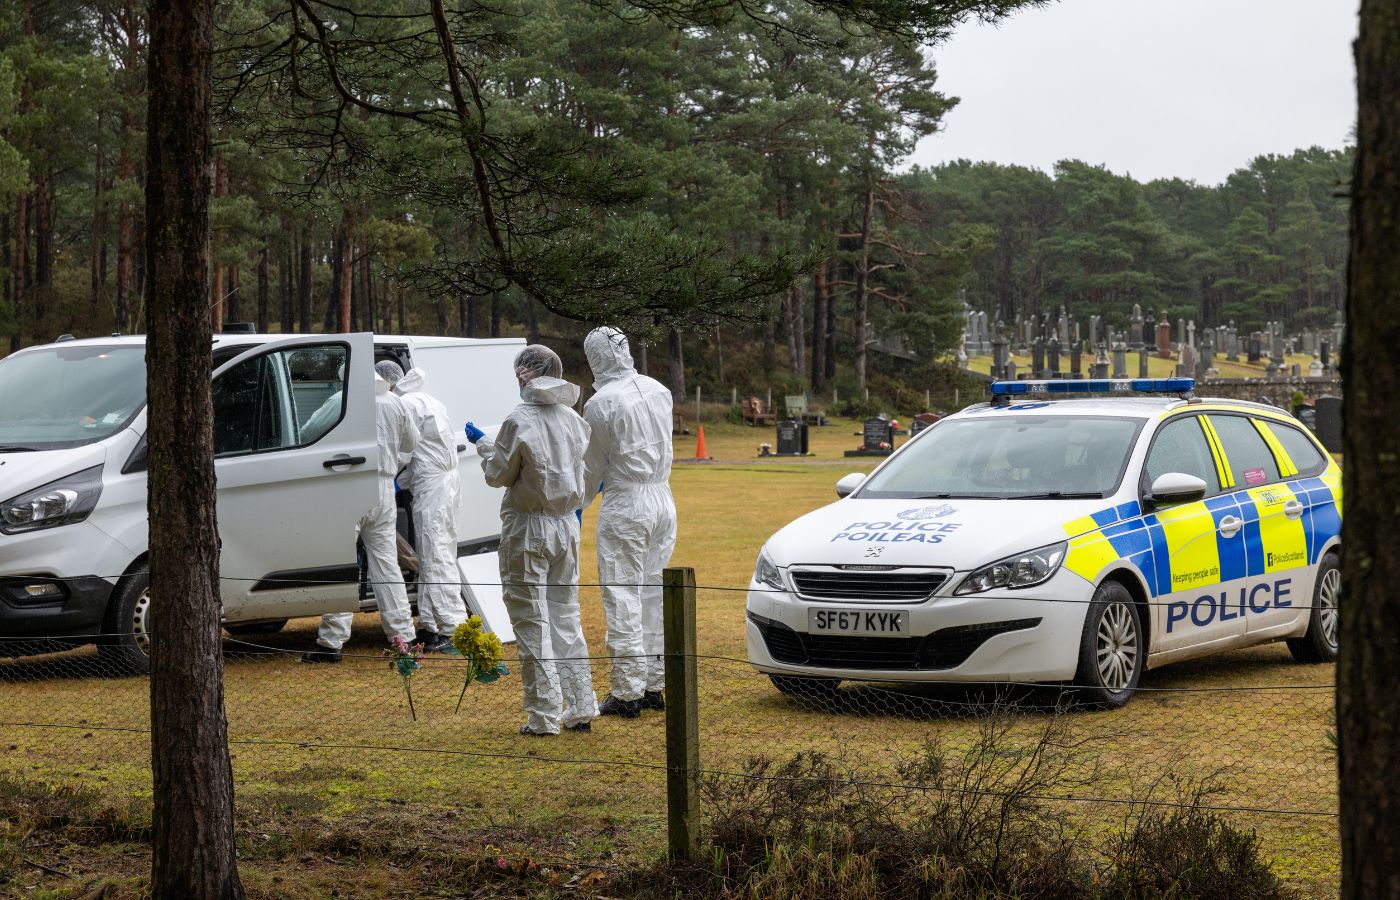 Police and forensics are investigating the 'unexplained death'.